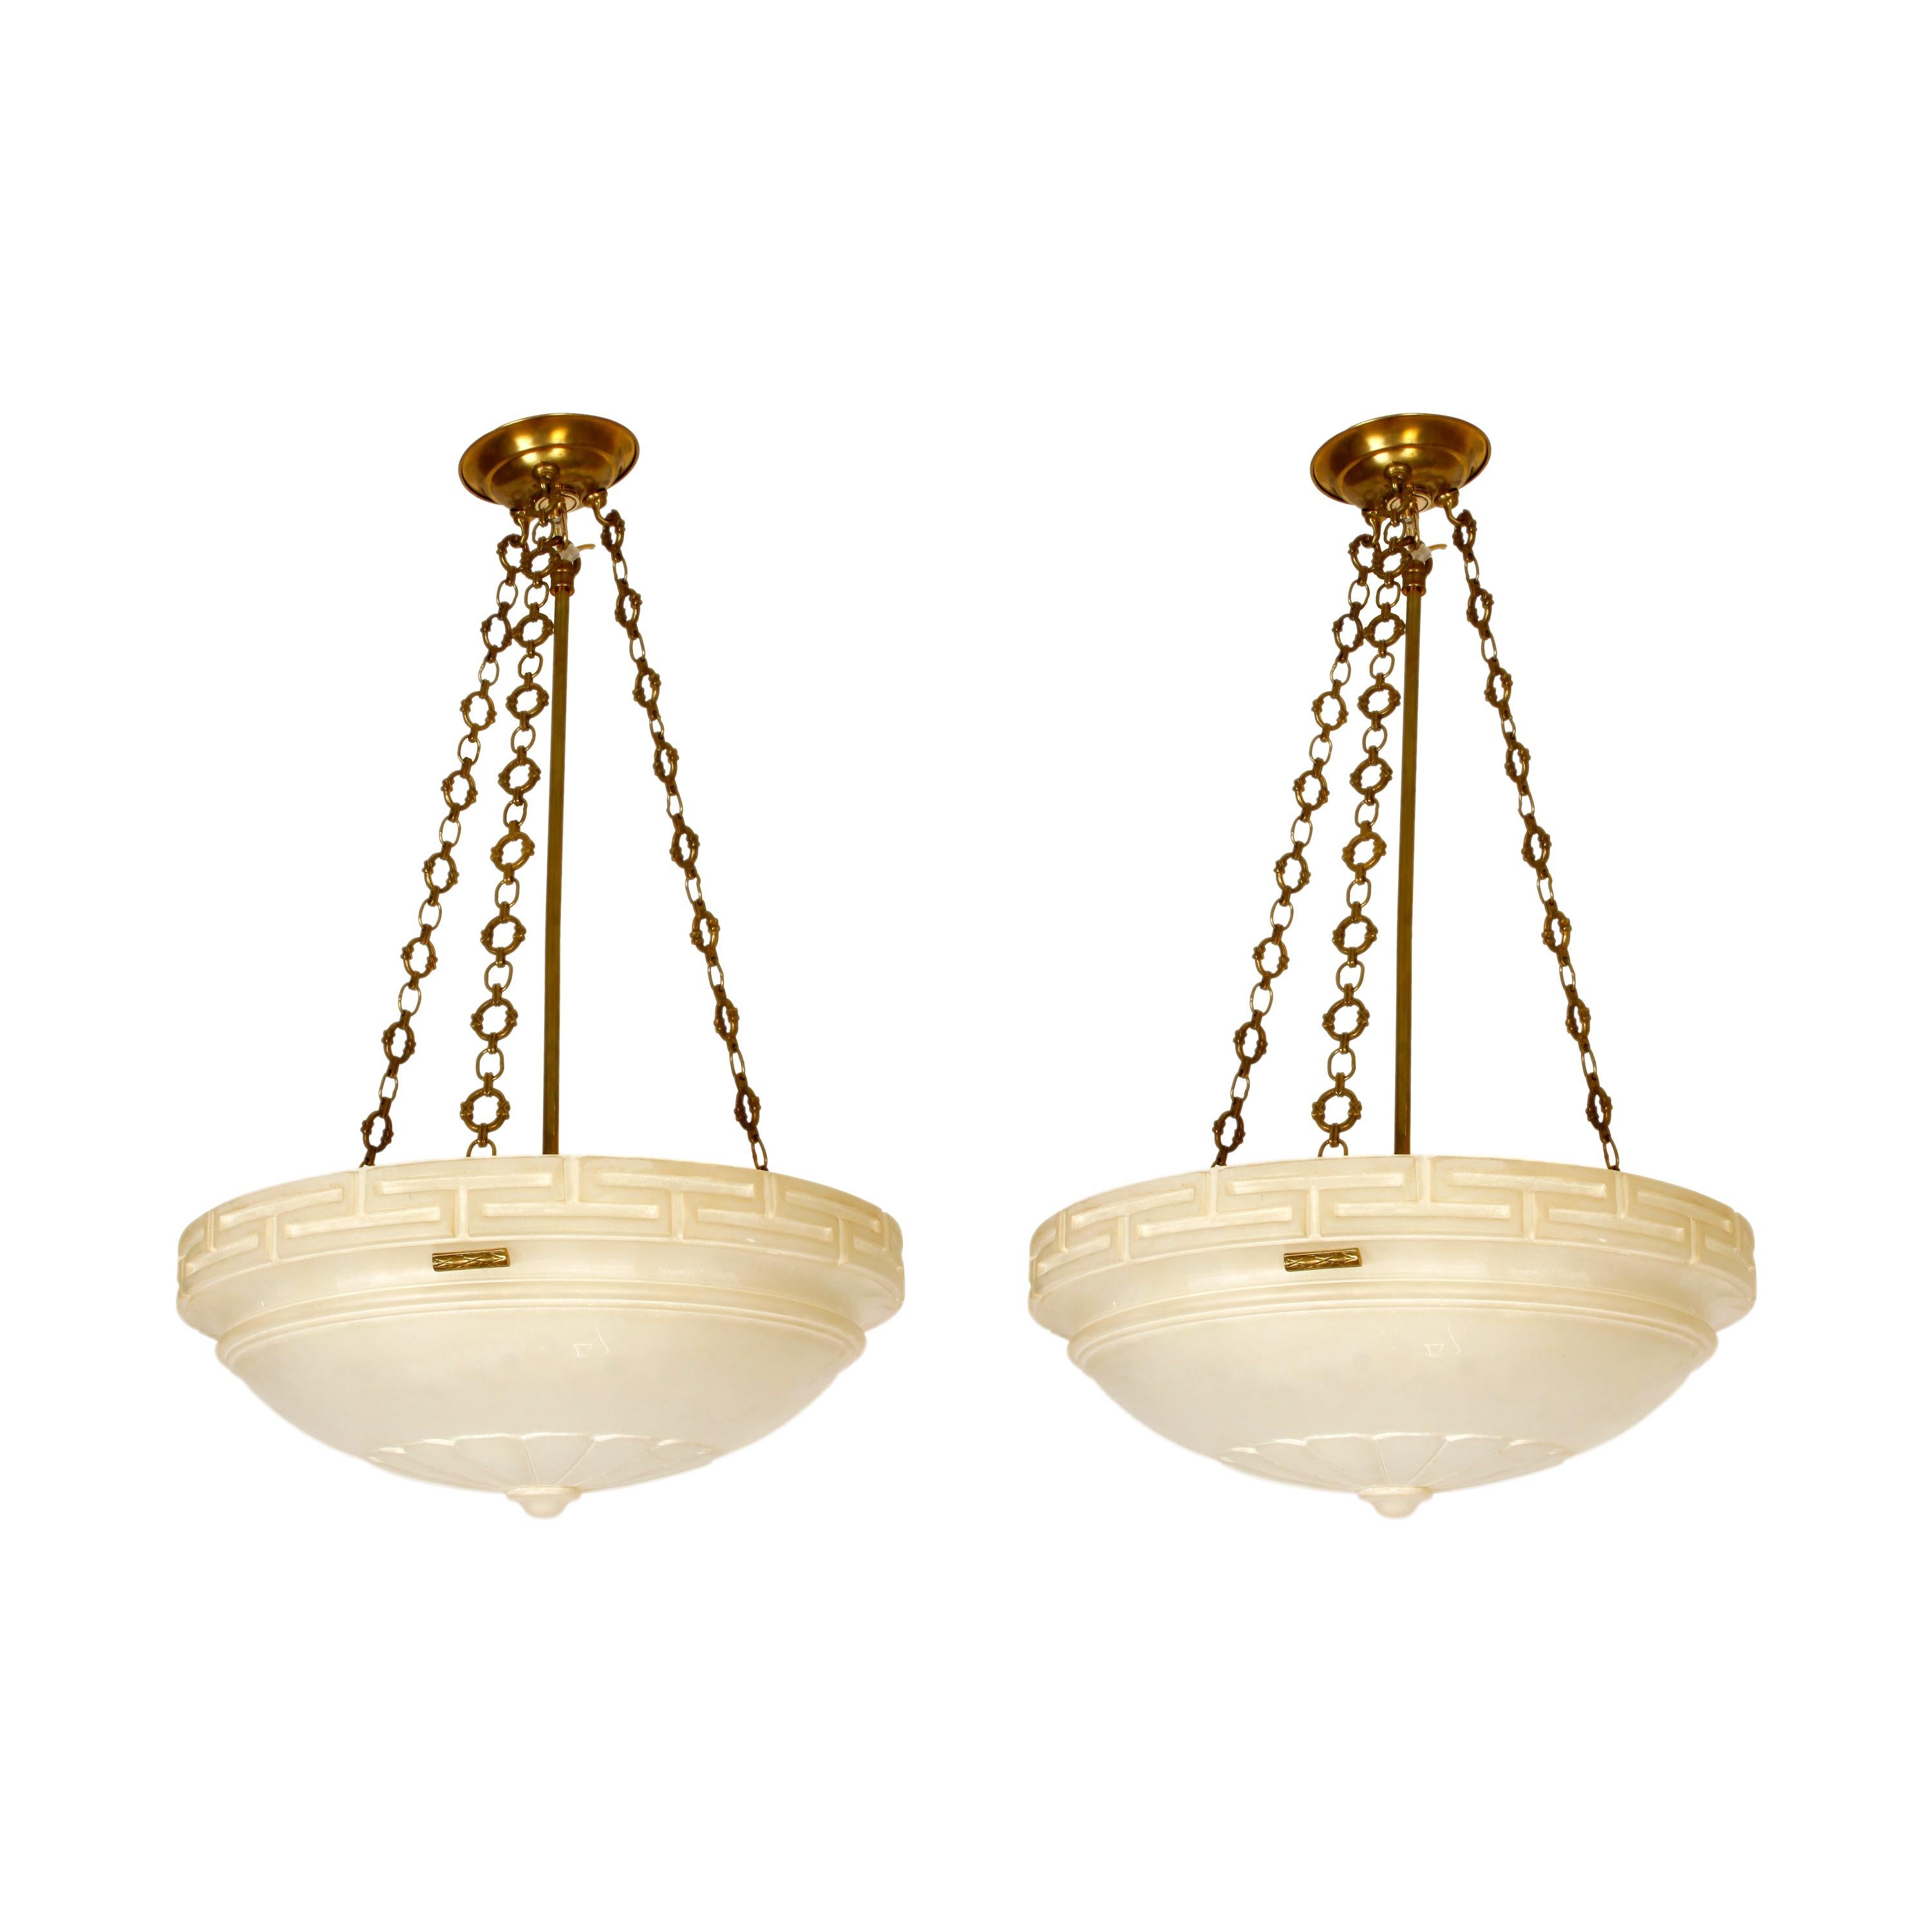 Neoclassical Style Alabaster Ceiling Lights